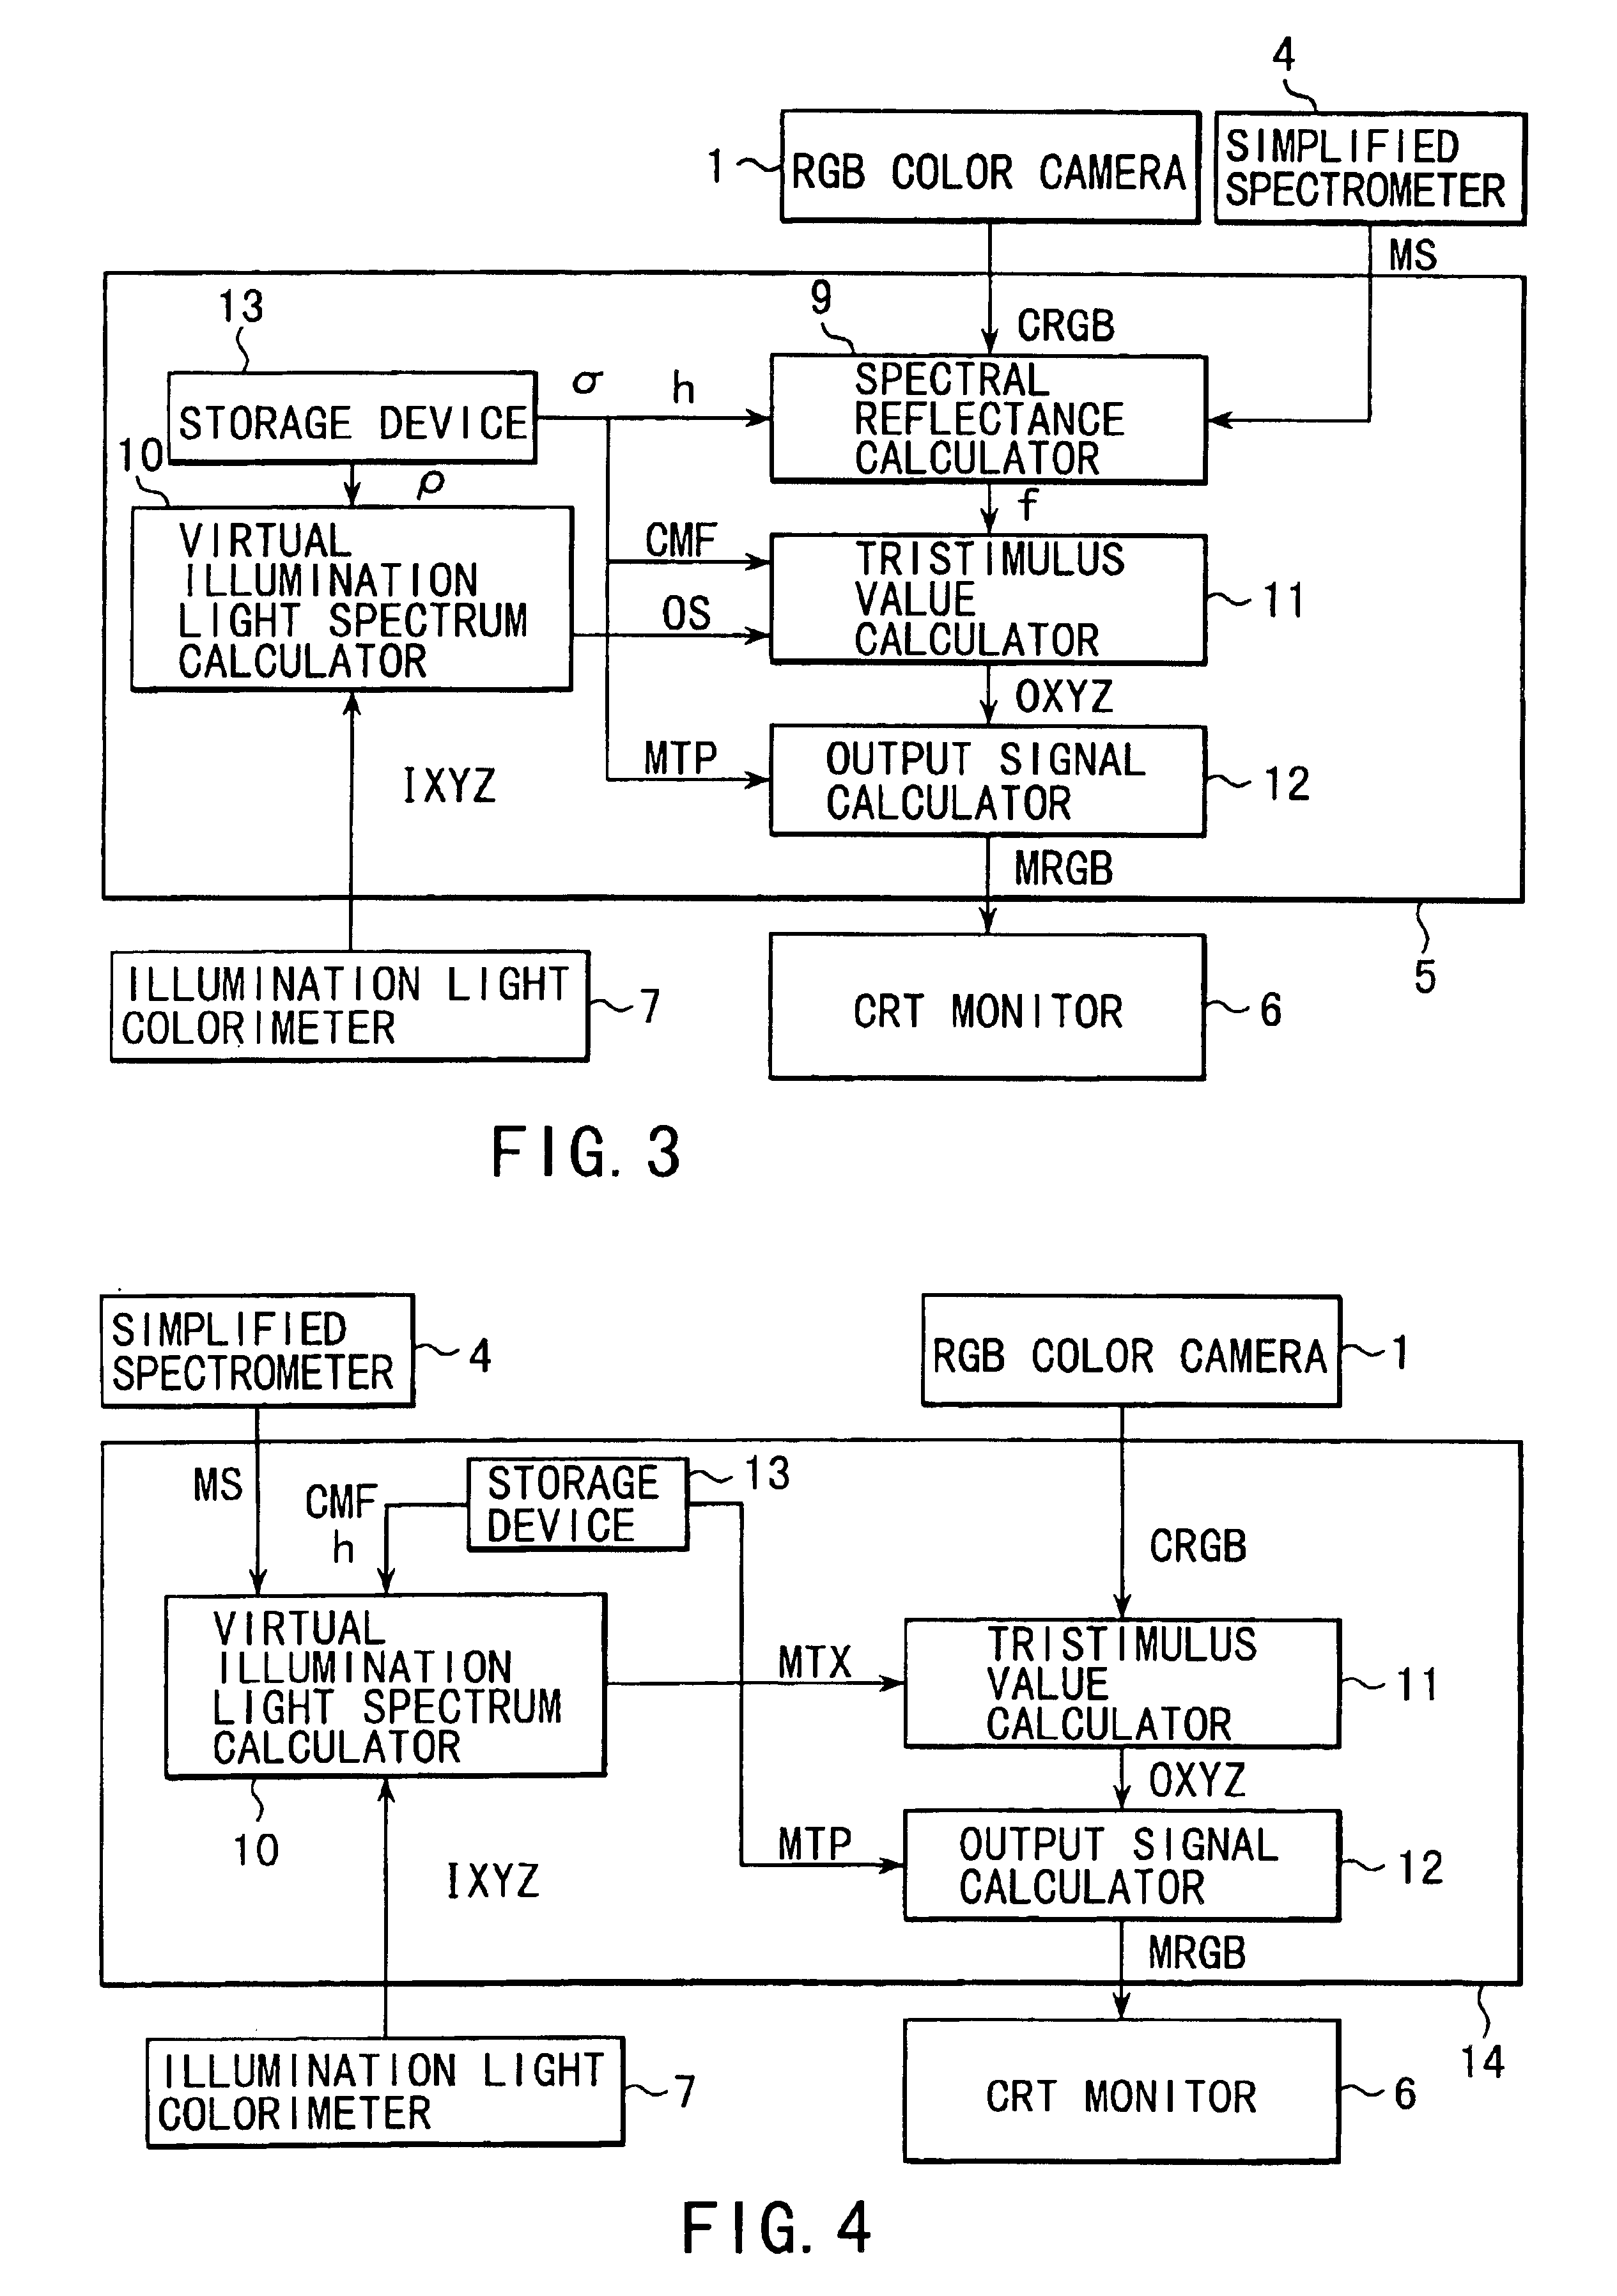 Color reproducing system for reproducing a color of an object under illumination light